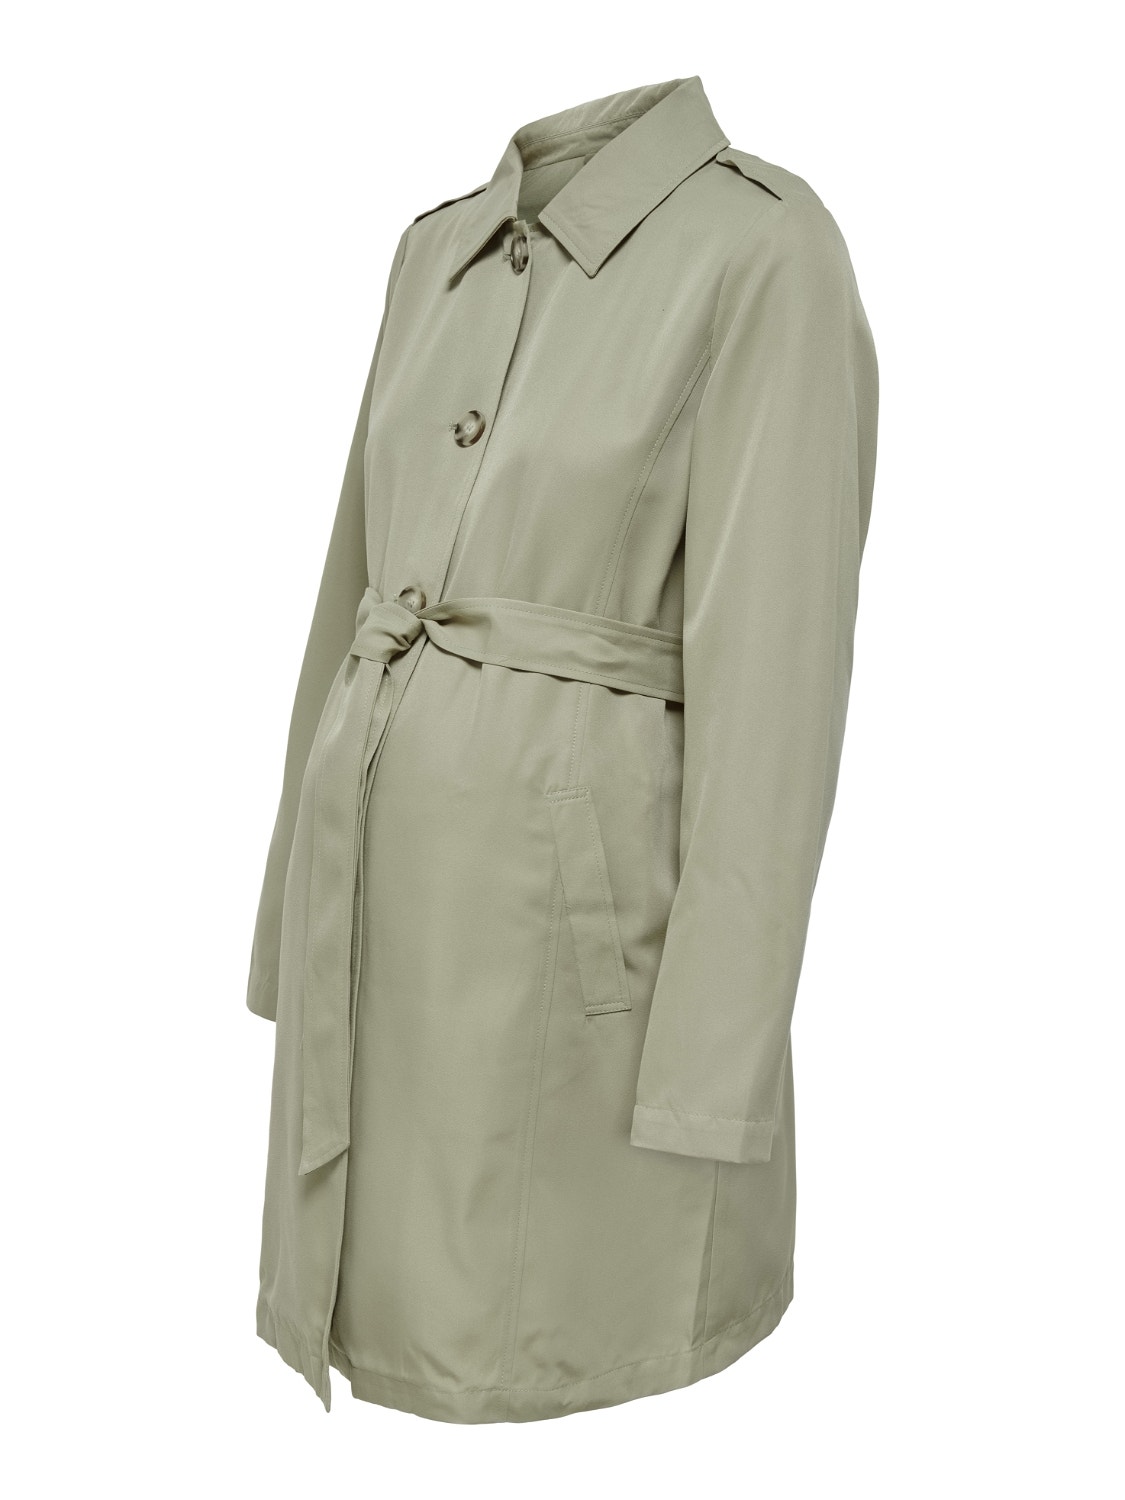 ONLY Trench-coats -Slate Green - 15256984